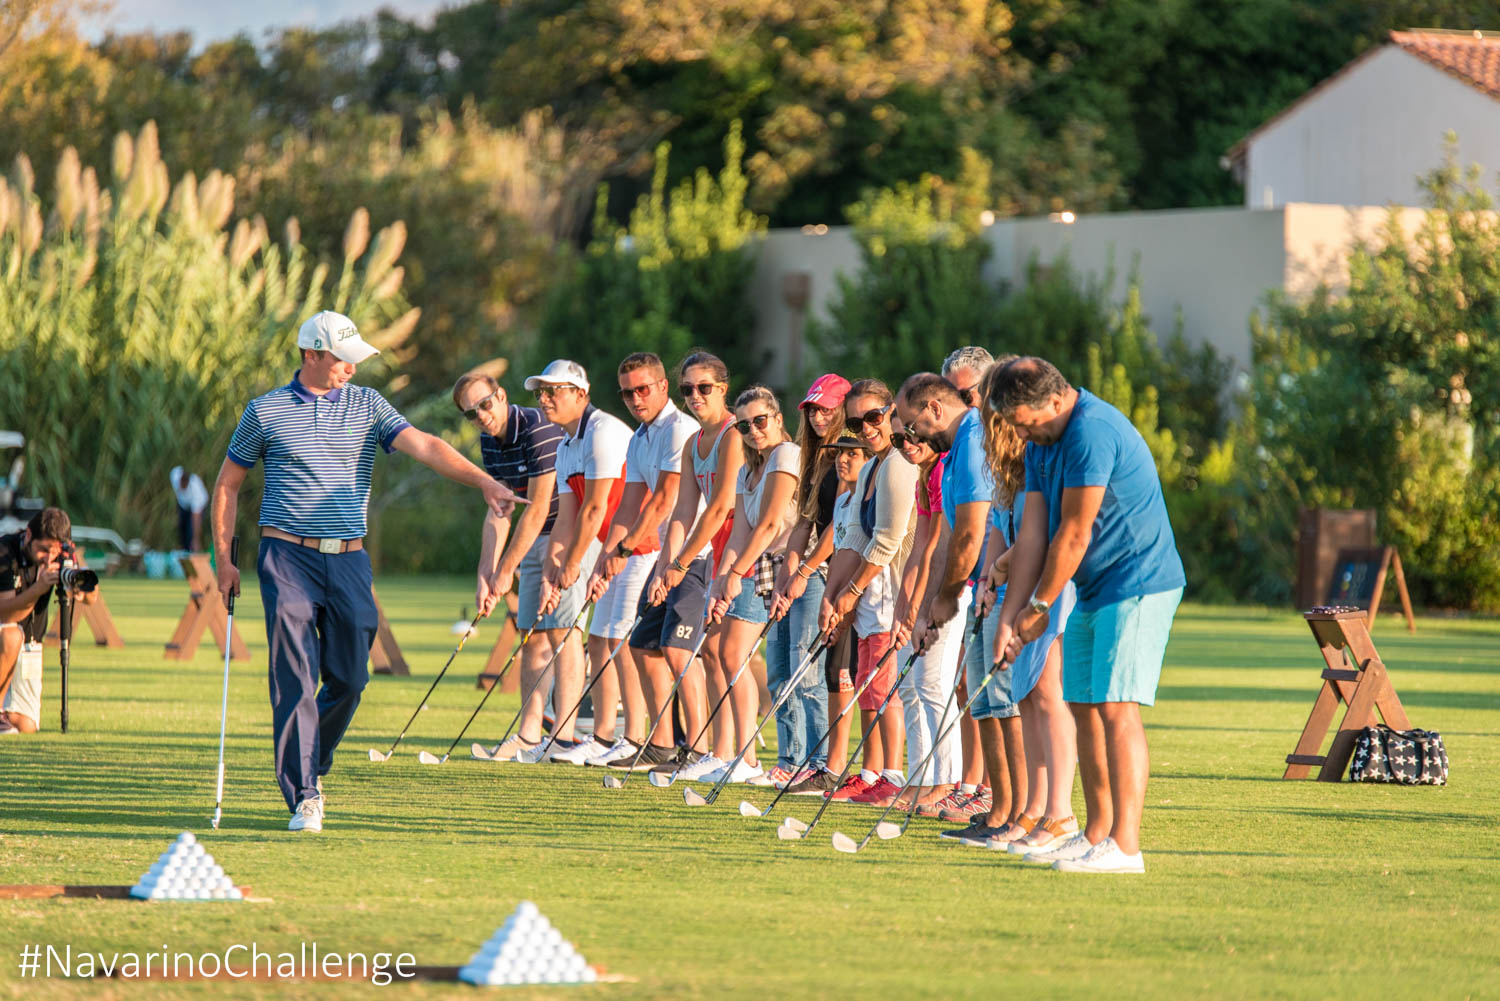 Learning to swing at the Golf clinics organized by Navarino Golf Academy © Elias Lefas